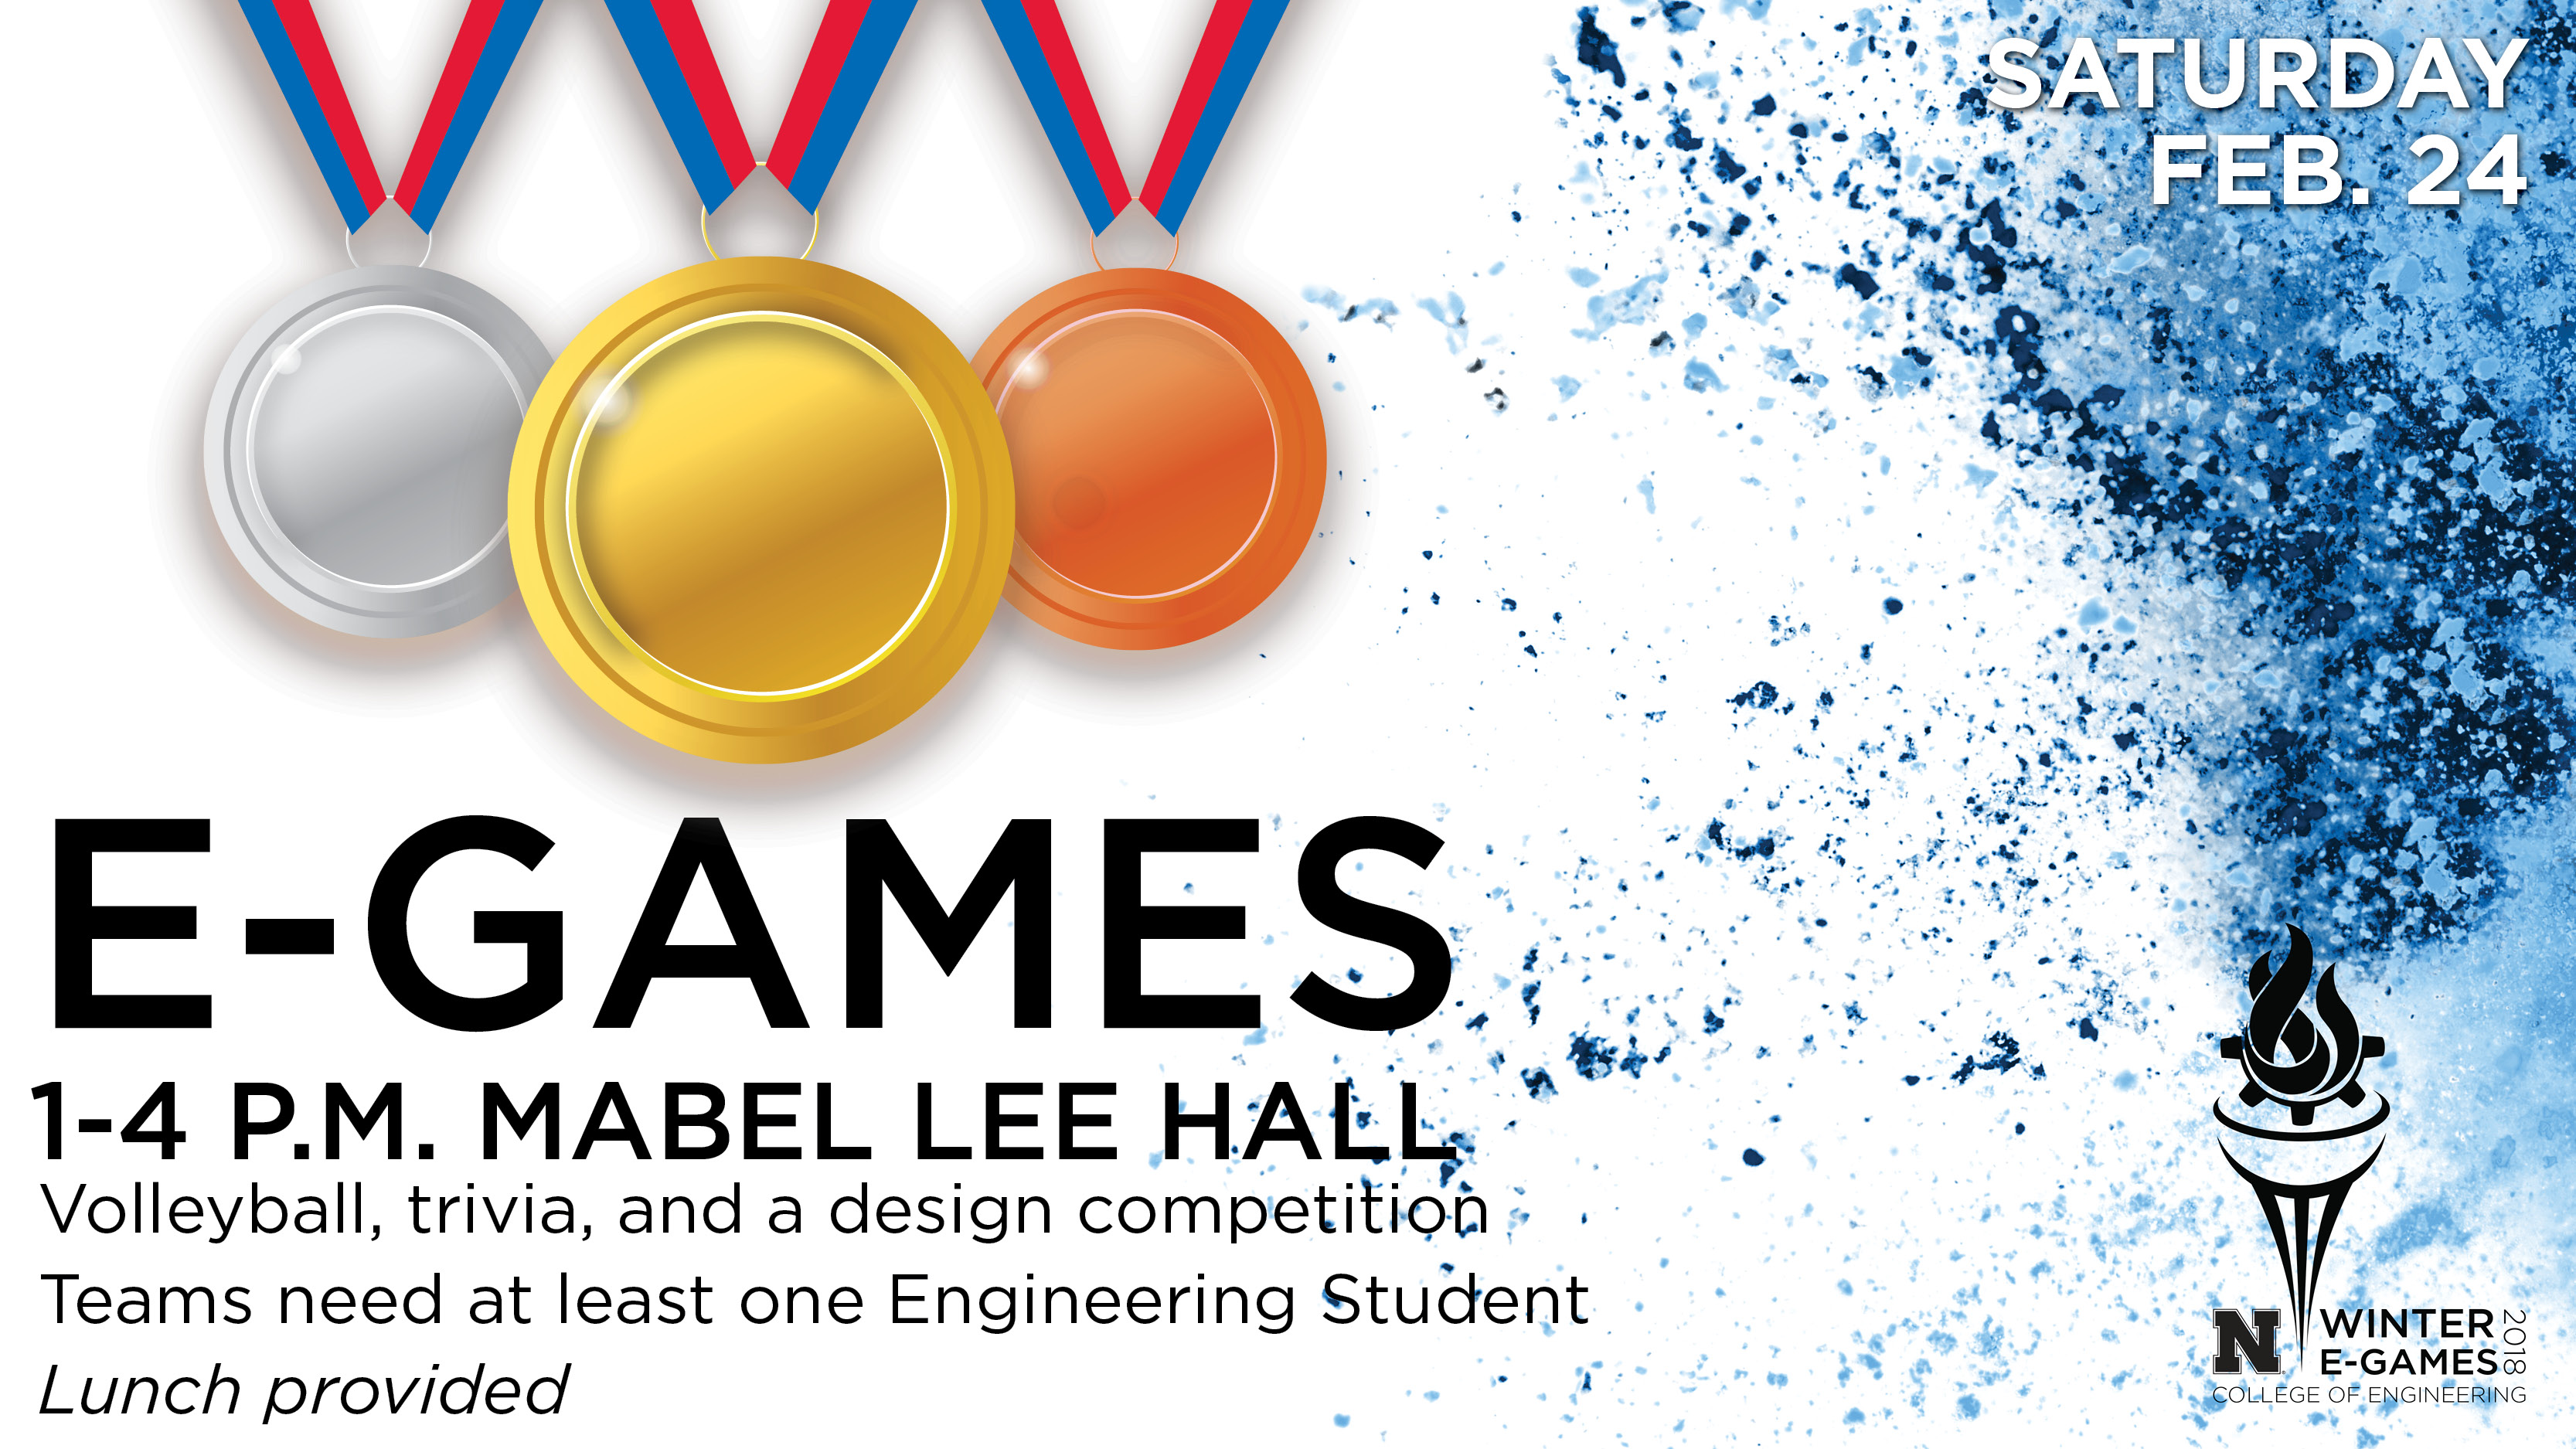 The E-Games are today, 1-4 p.m. in Mabel Lee Hall.